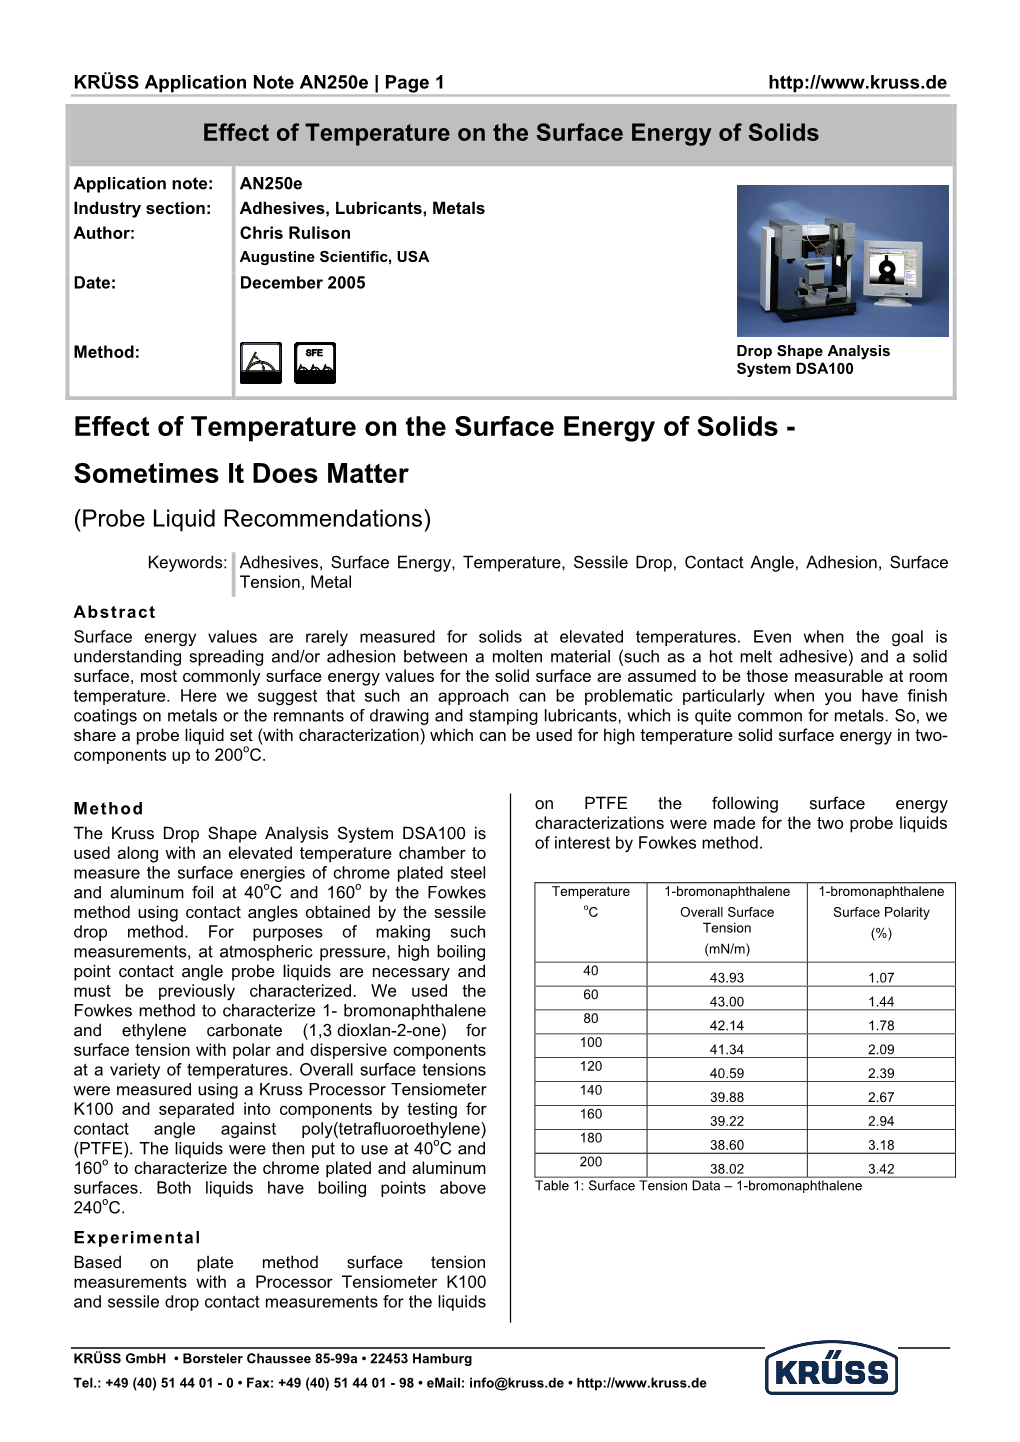 Effect of Temperature on the Surface Energy of Solids